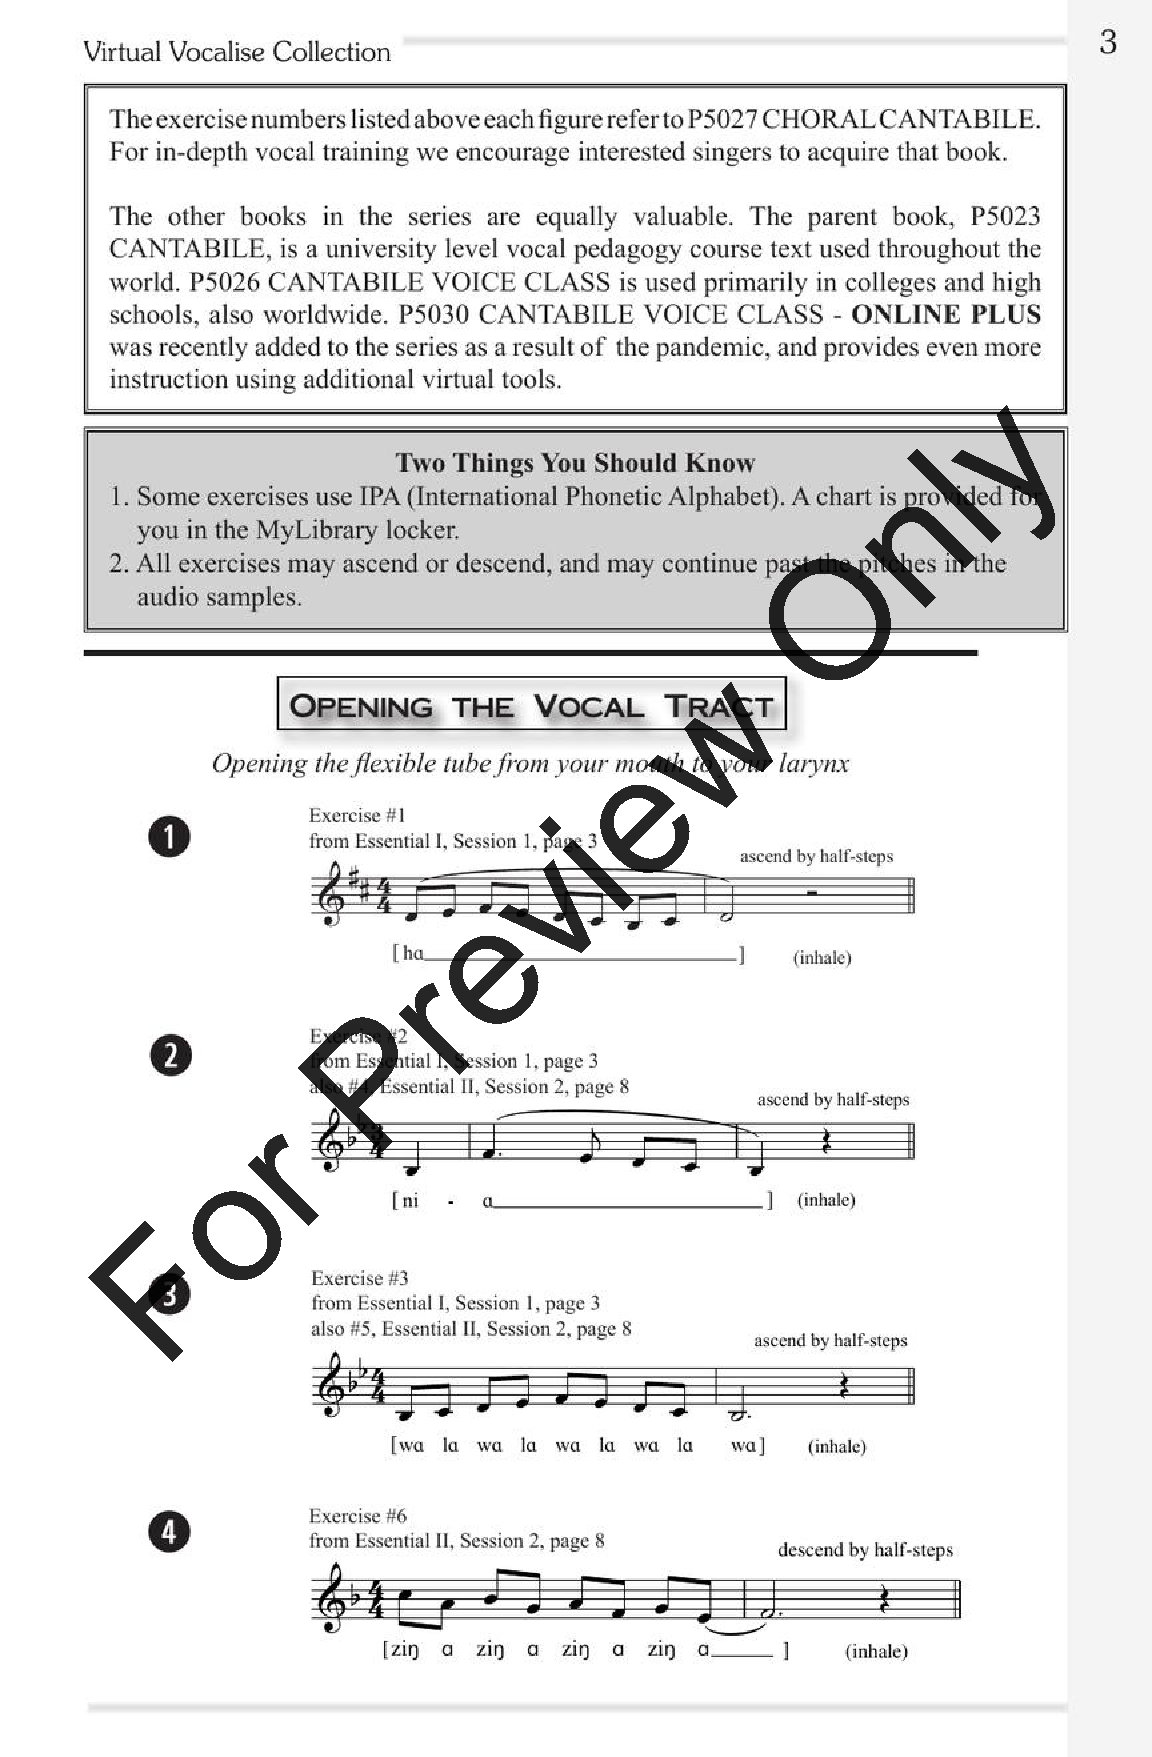 Cantabile Virtual Vocalise Collection Book with Online Media Access